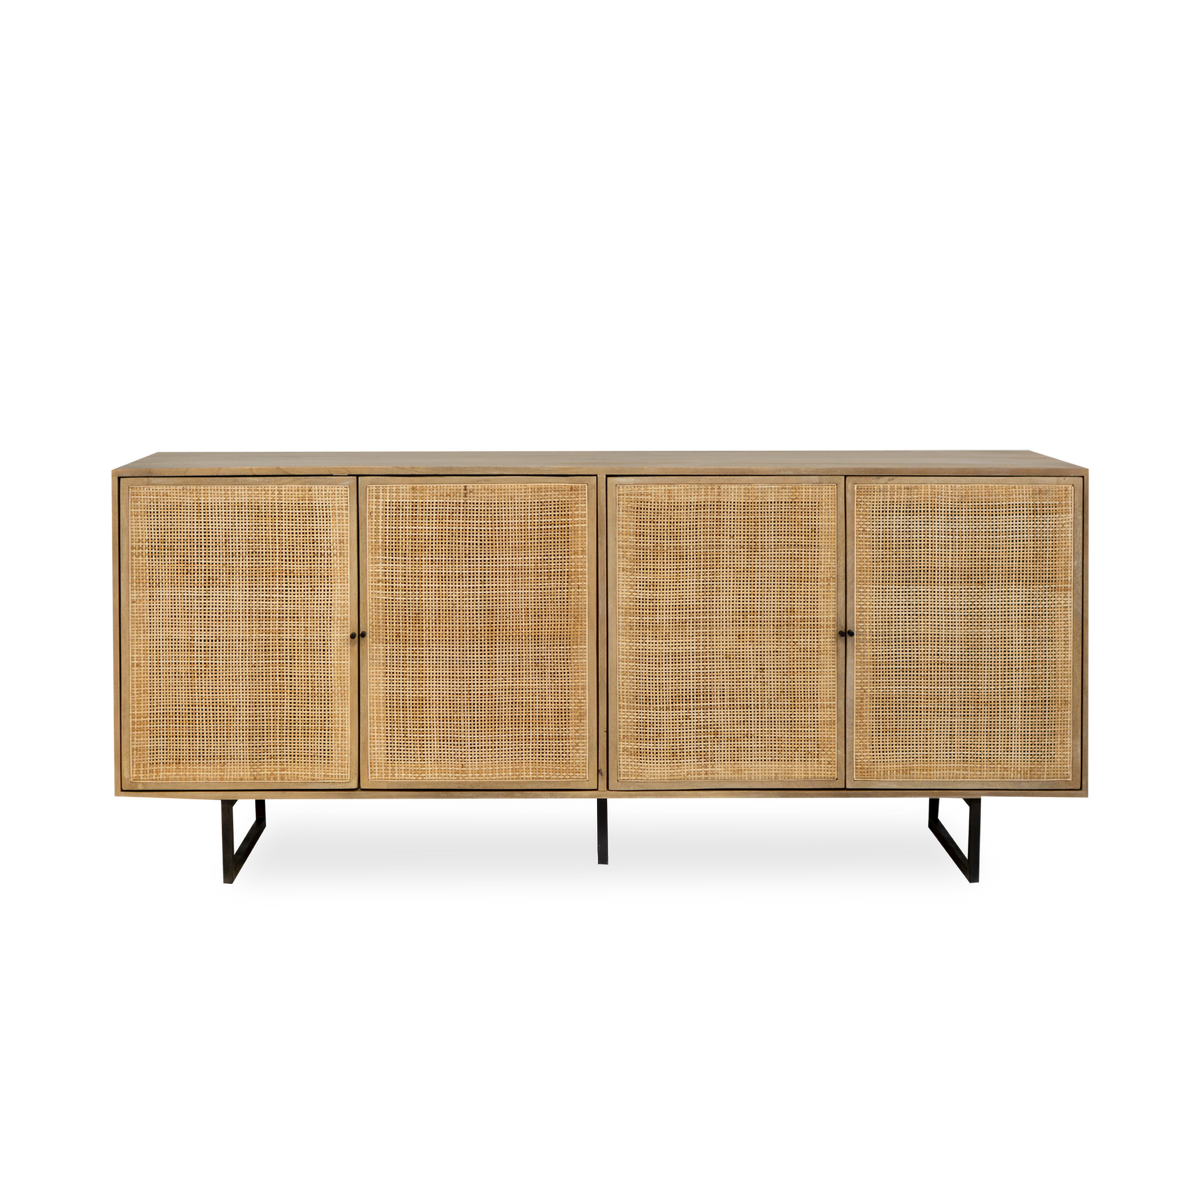 The Accord Sideboard has a Mid-century-inspired style with an organic twist.